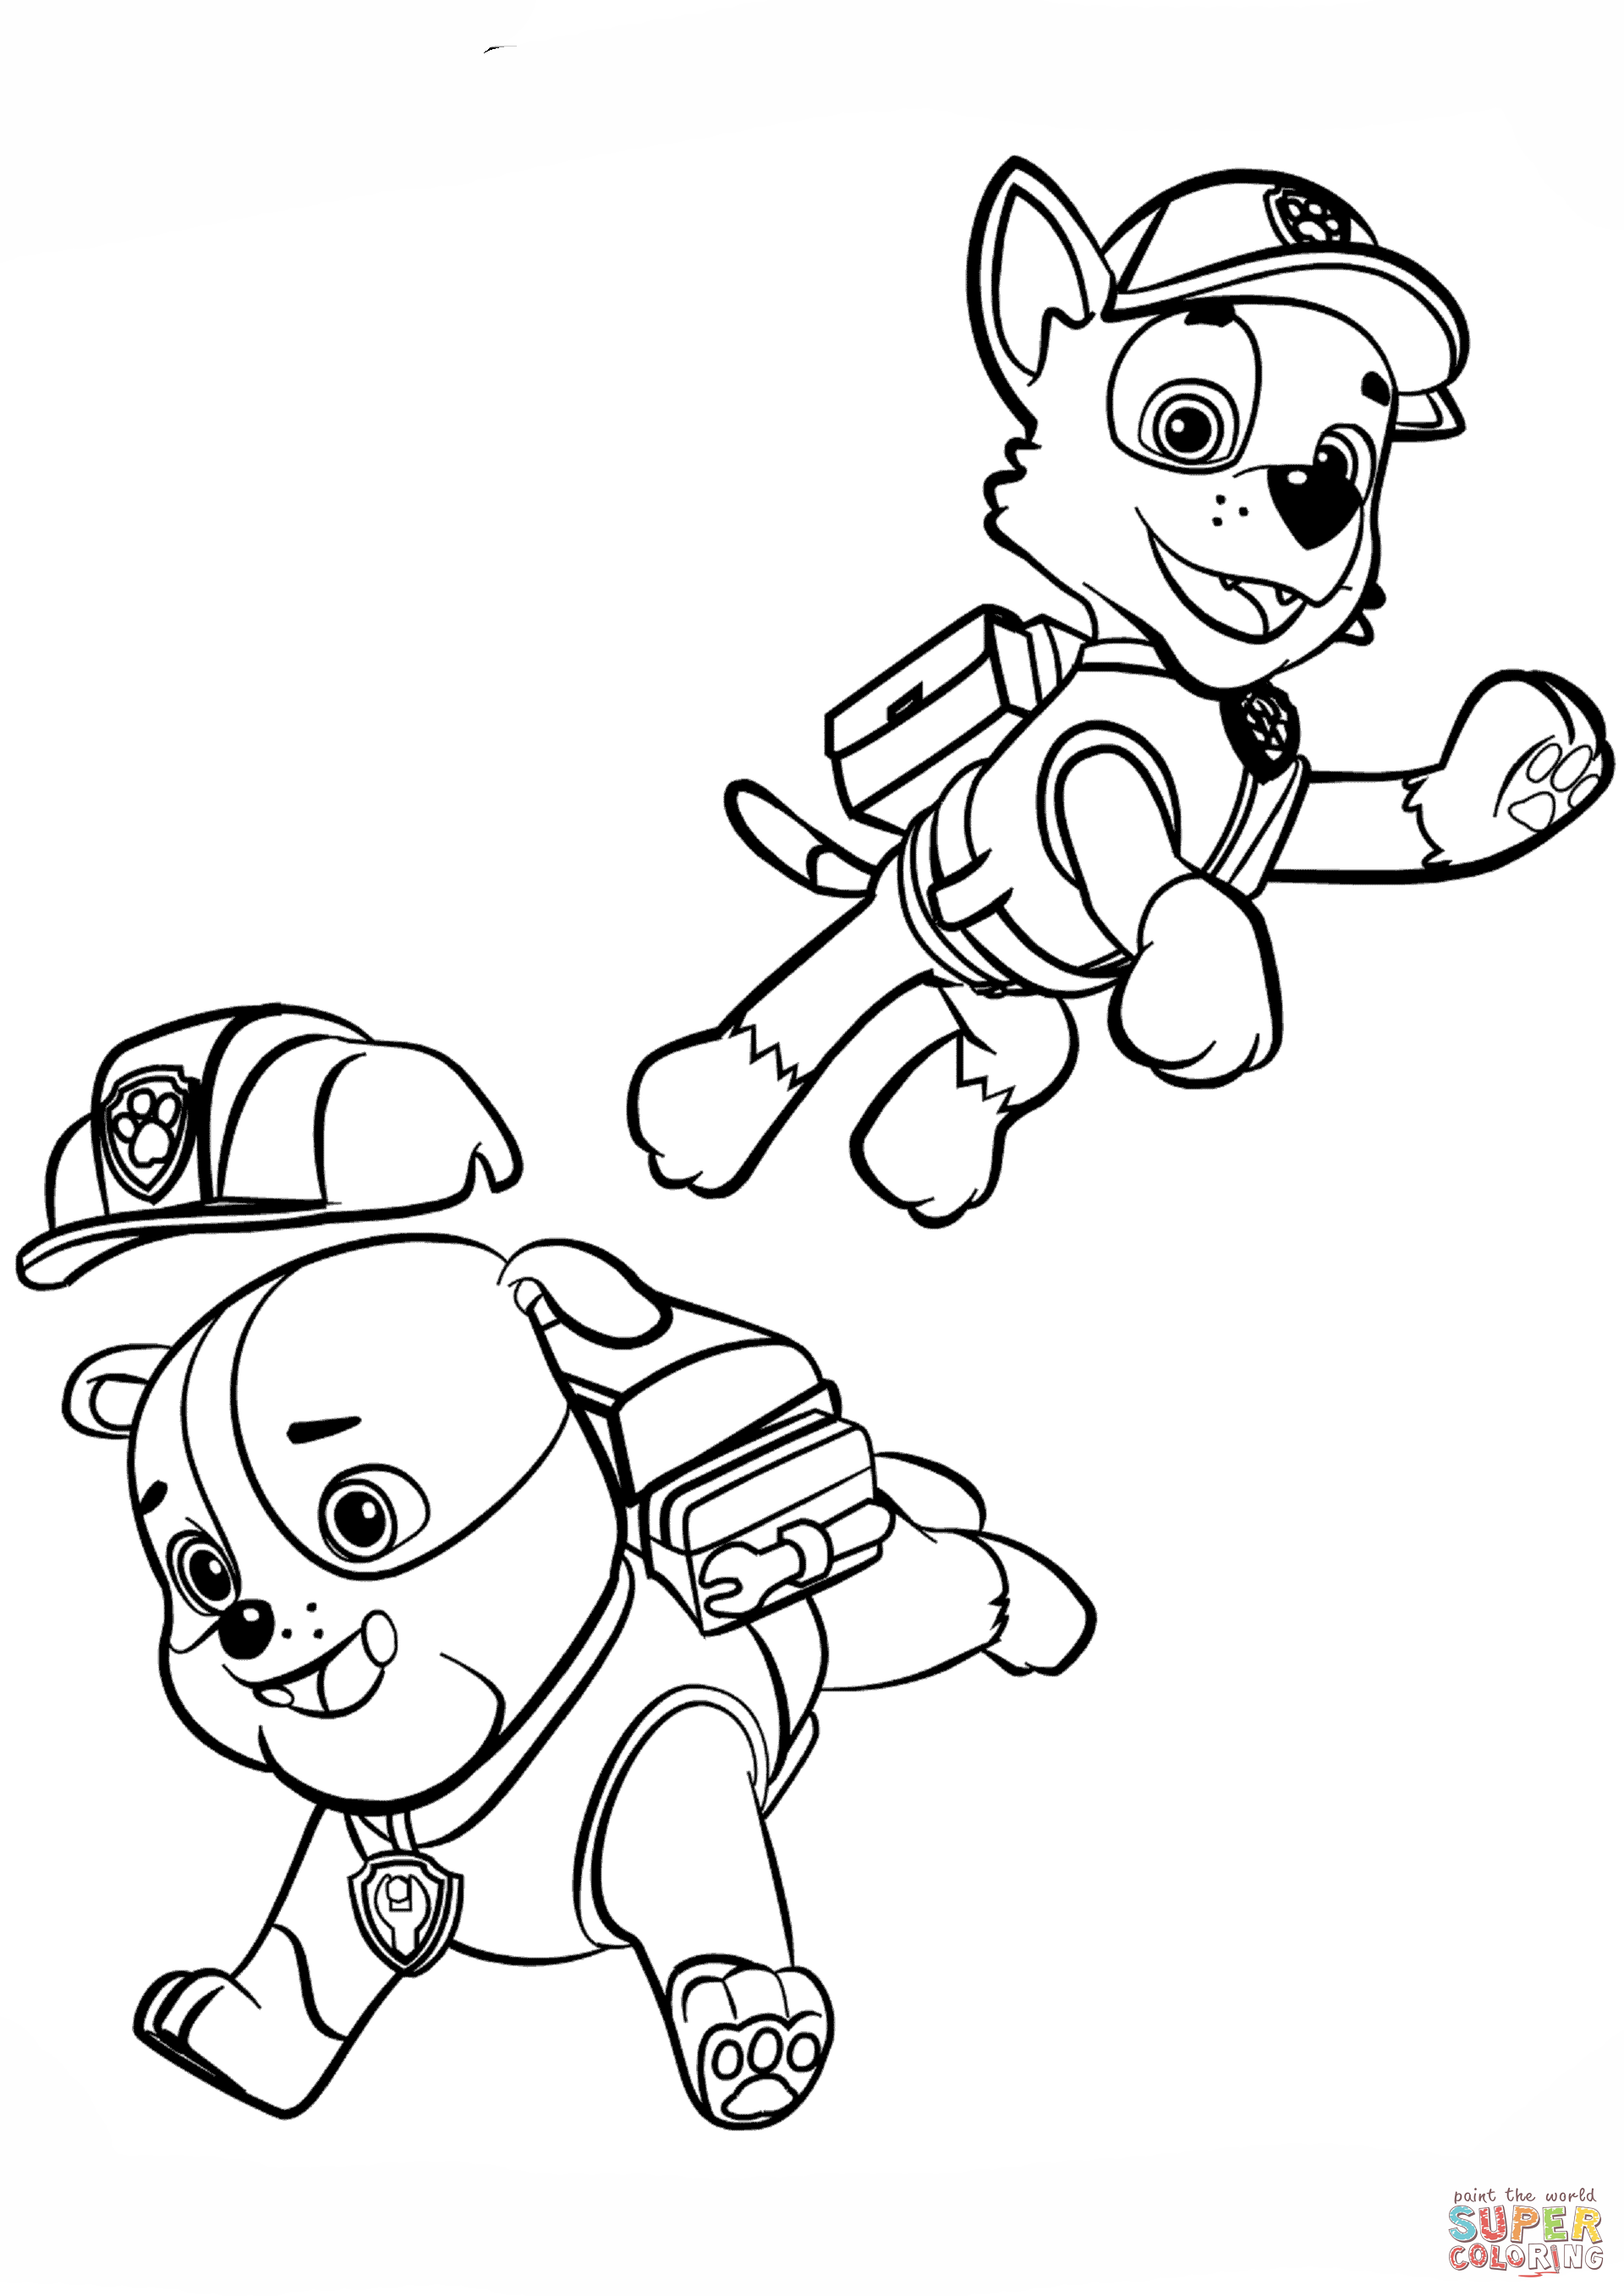 Paw Patrol Rubble and Rocky coloring page | Free Printable Coloring Pages